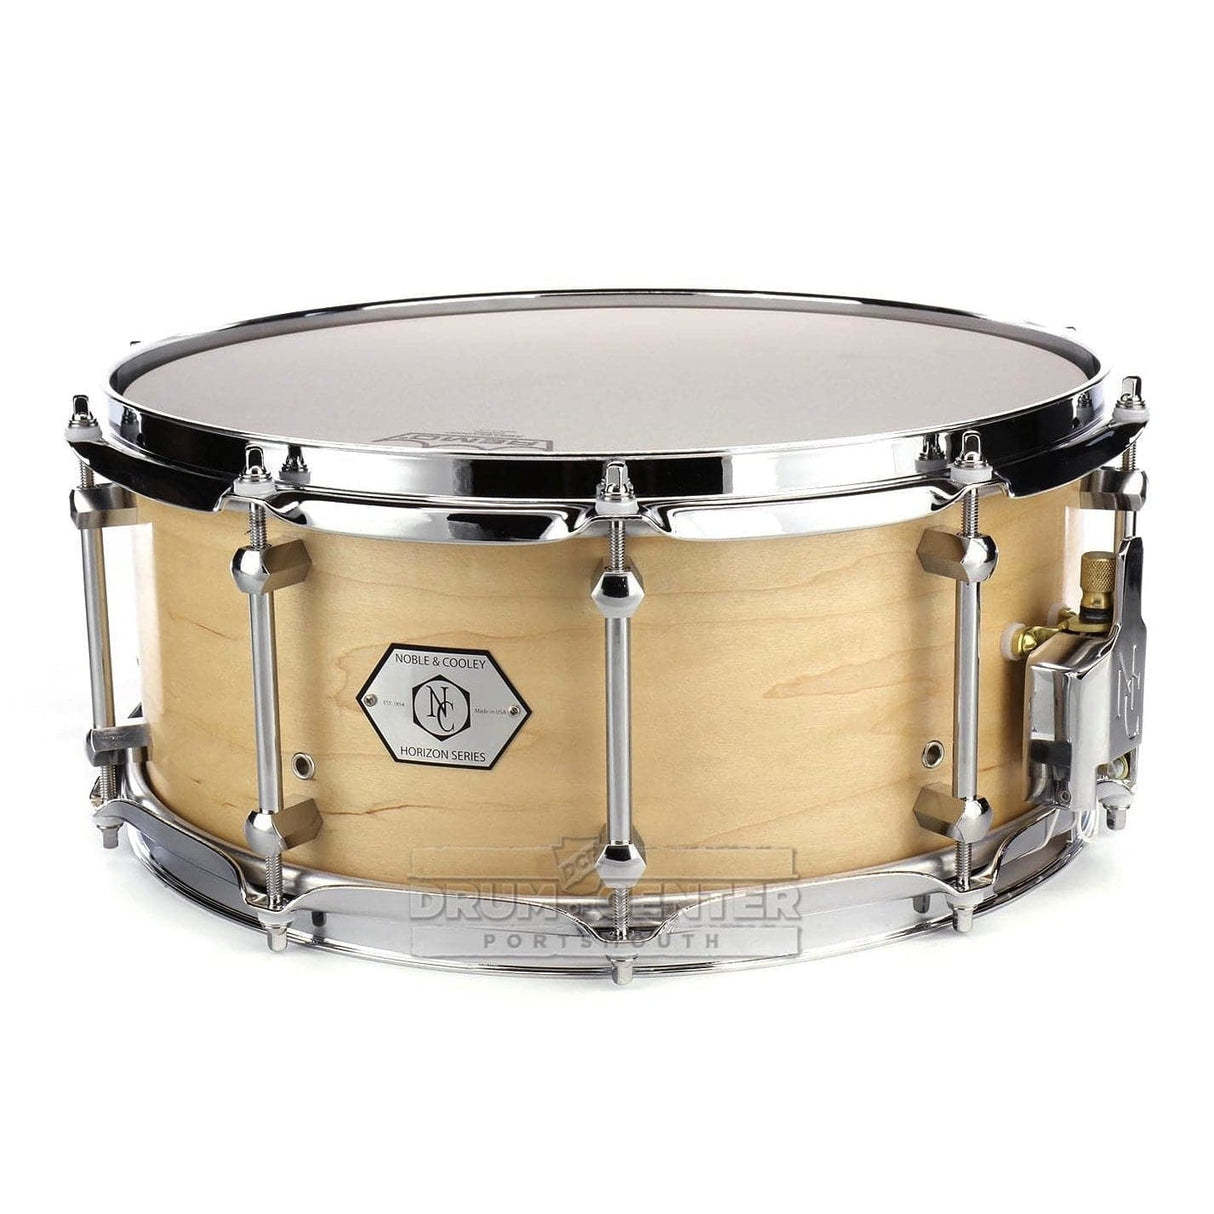 Noble & Cooley Horizon Snare Drum 14x6 Natural Oil